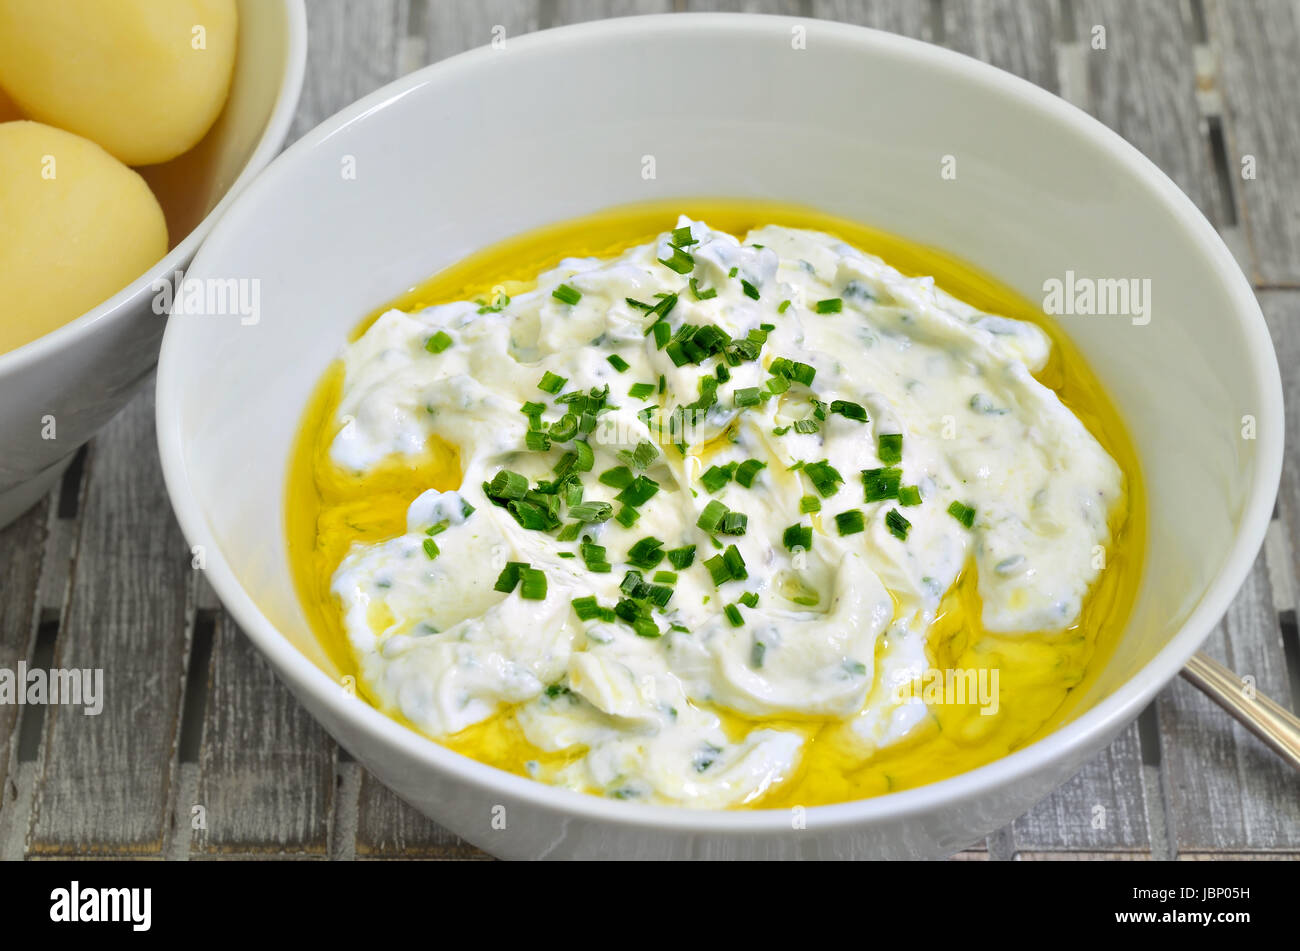 curd cheese with boiled potatoes linseed oil and chive, close up, macro, full frame Stock Photo